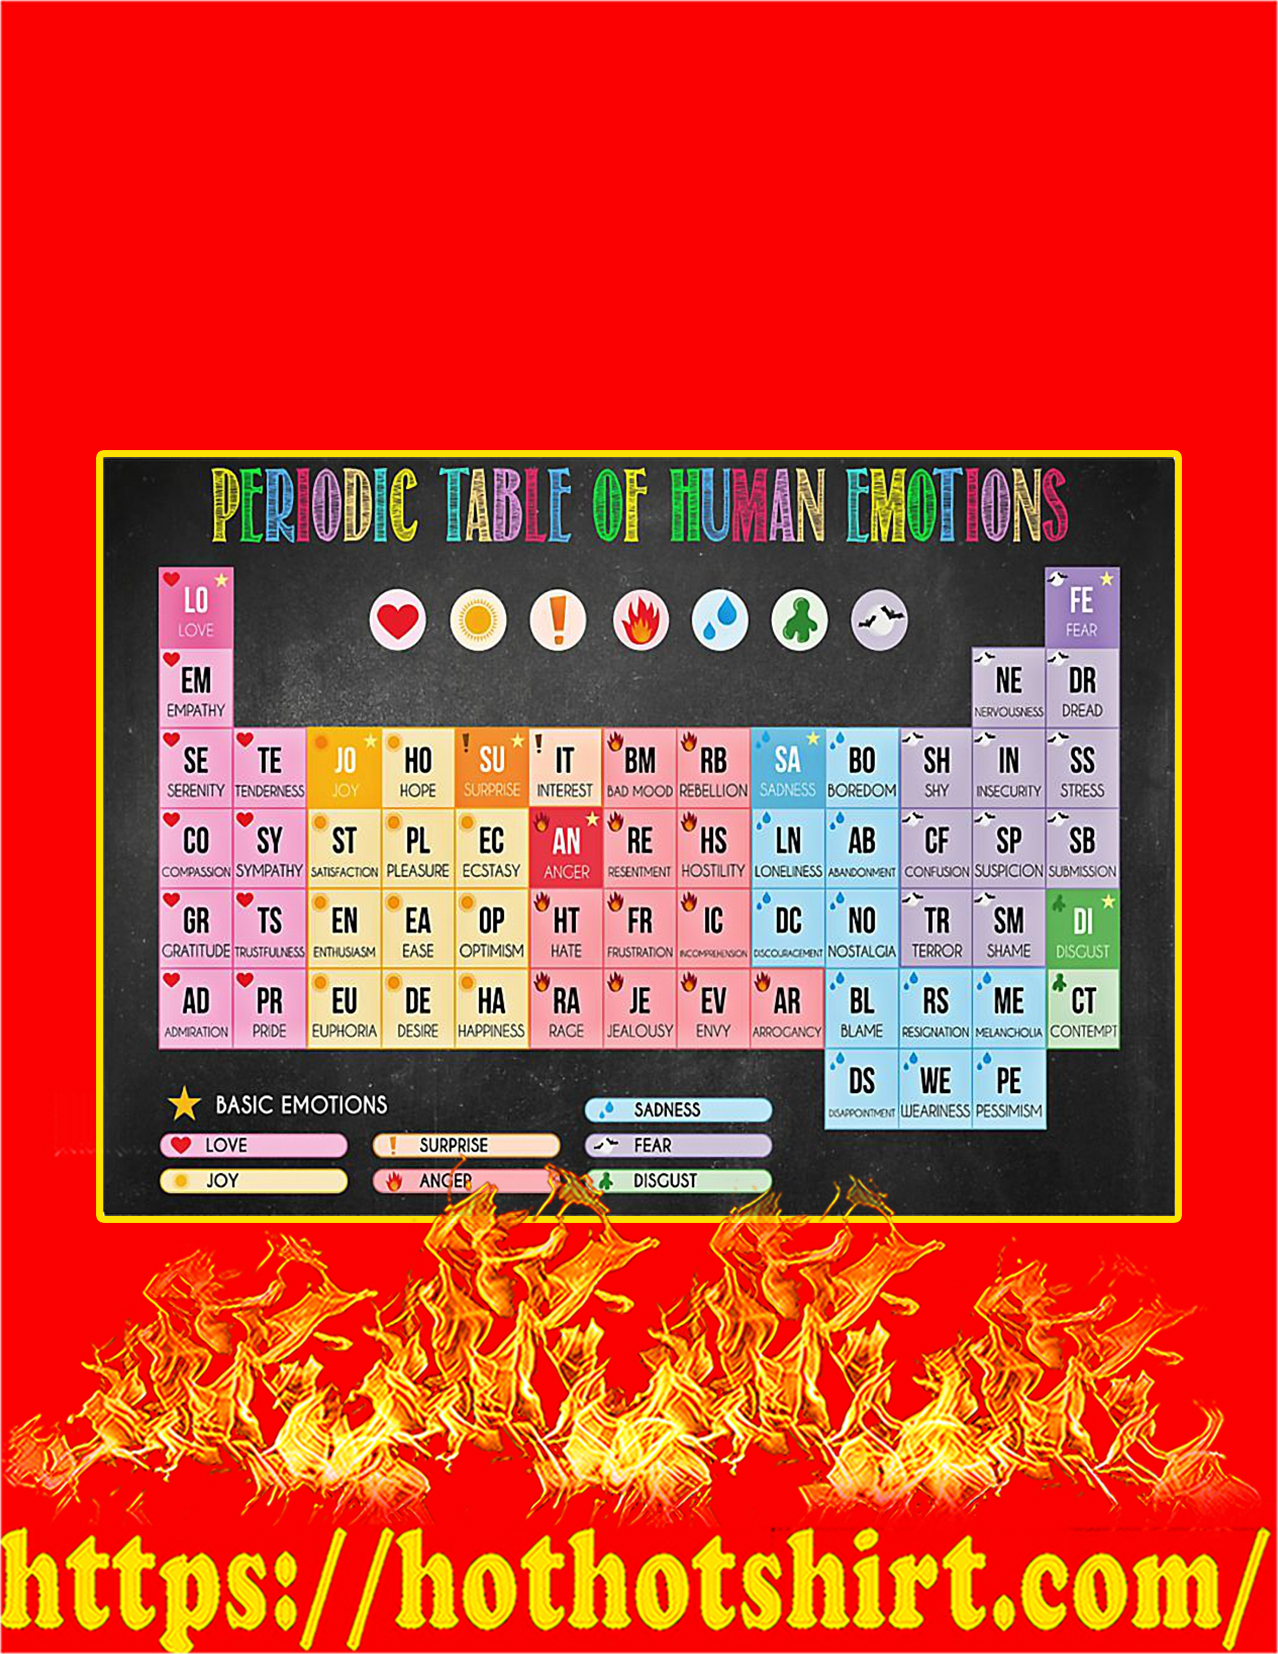 Social Worker Periodic Table Of Human Emotions poster